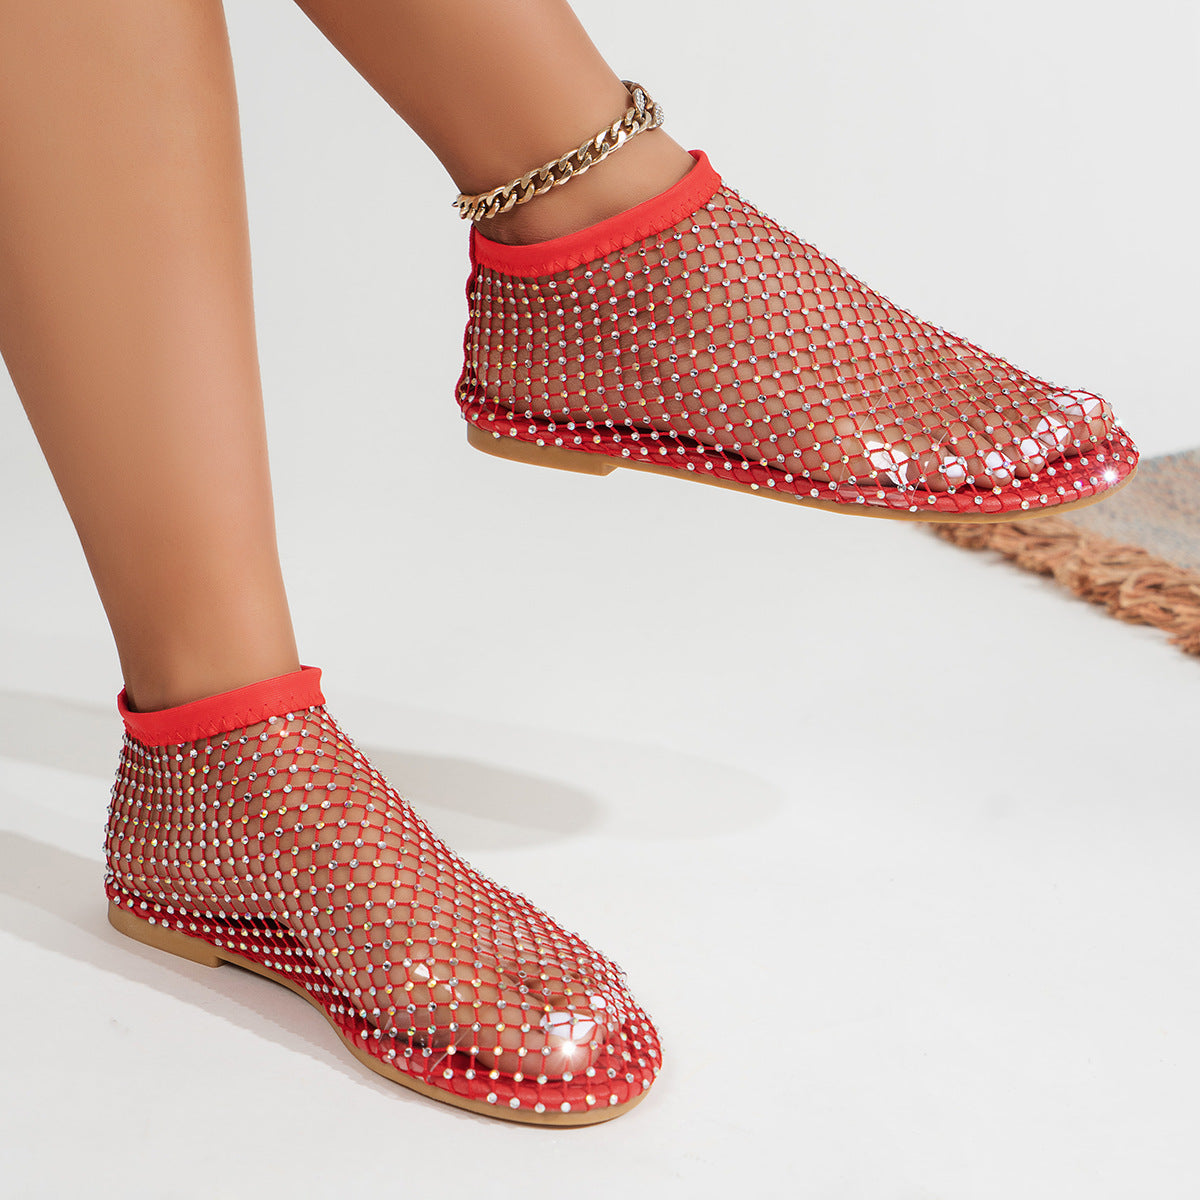 Belifi Fish Mouth Sandals Stretch Fishnet Stockings Hollow Short